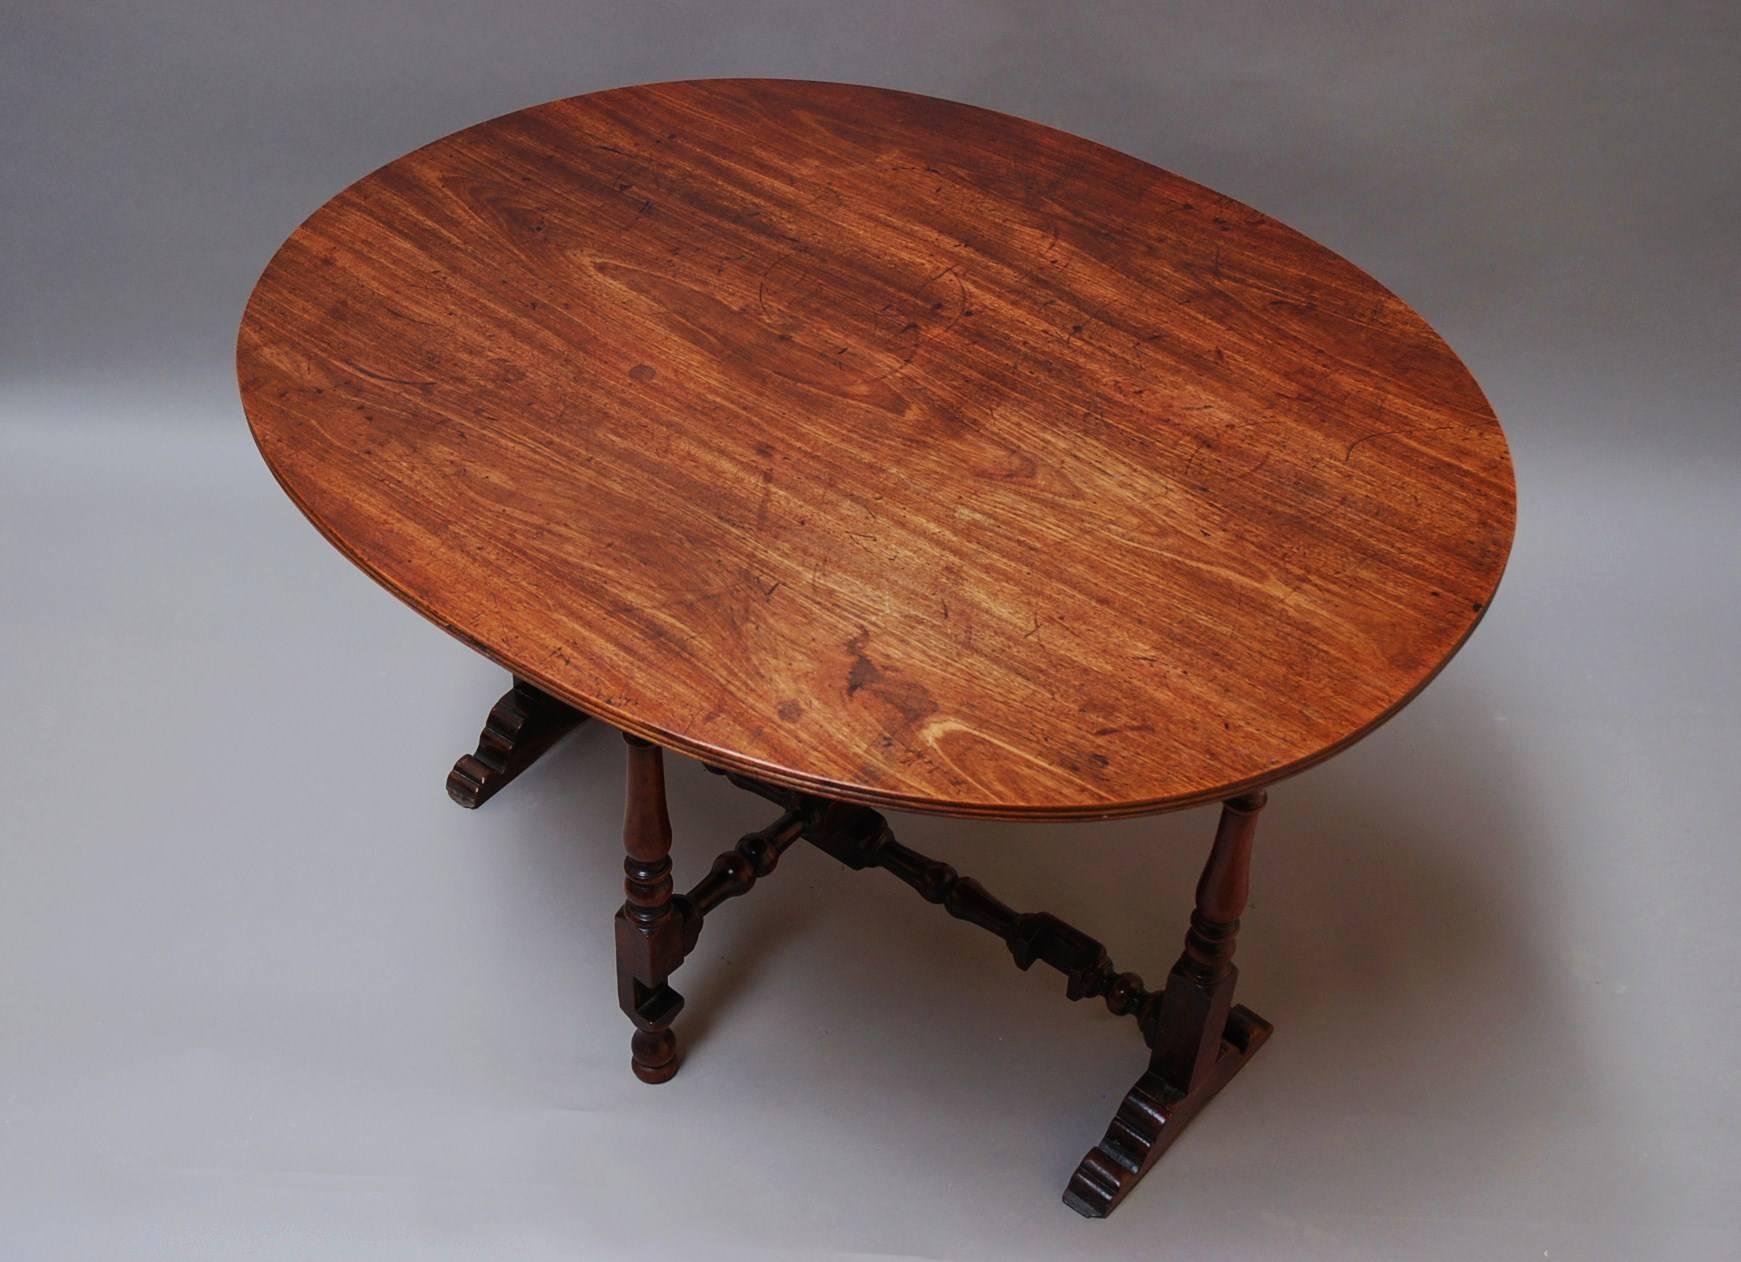 Rare Late 17th Century Yew Wood Coaching Table with Later Mahogany Top 2